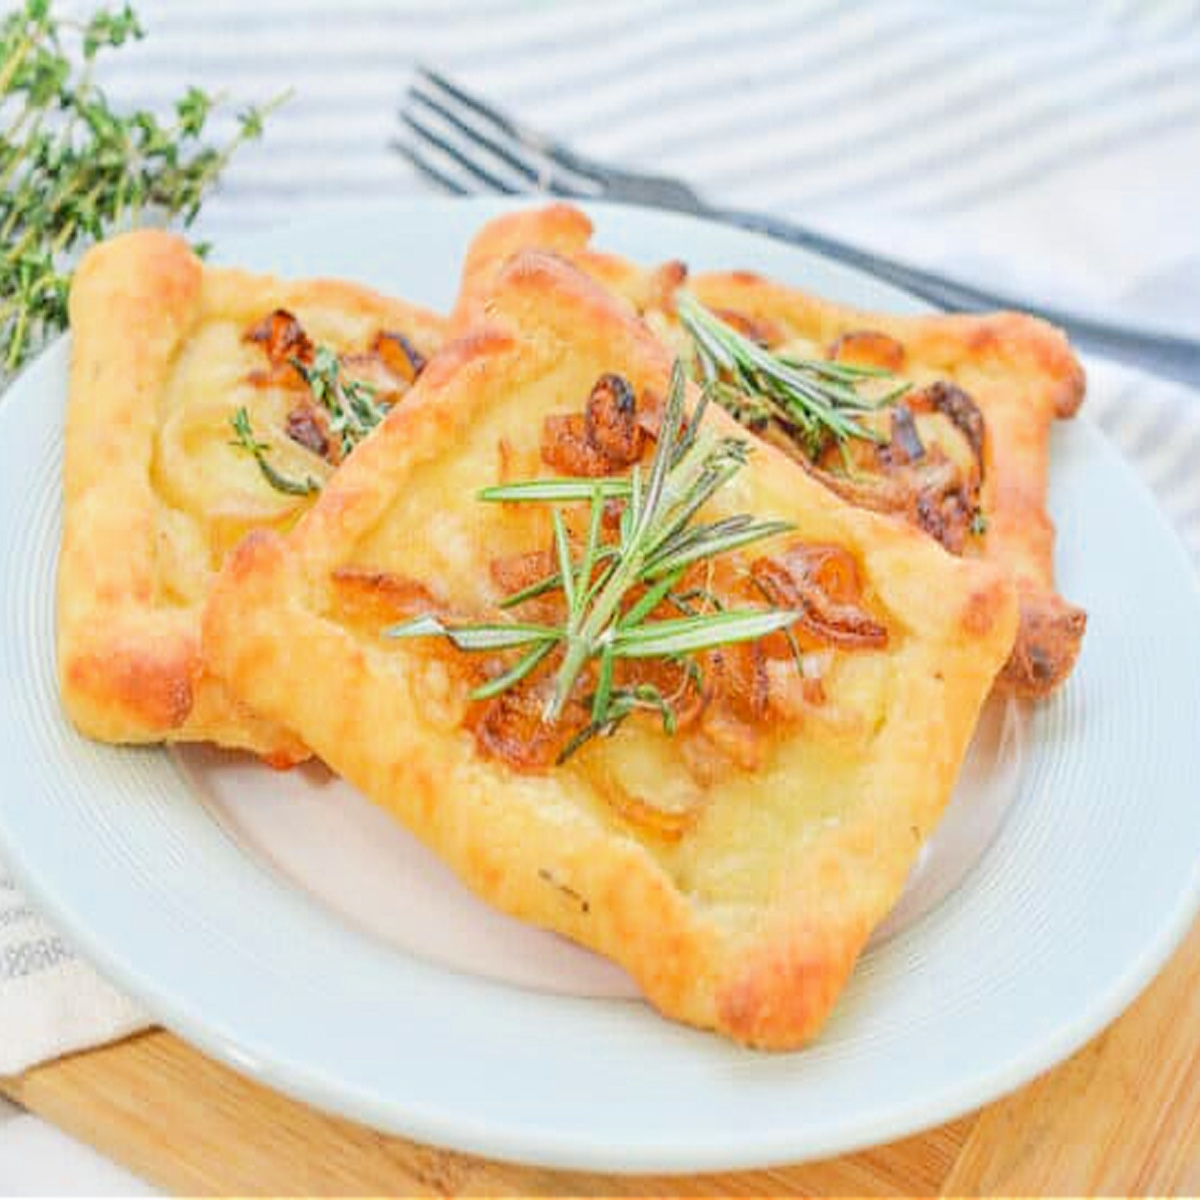 caramelized onions and brie tart appetizer on white plate.